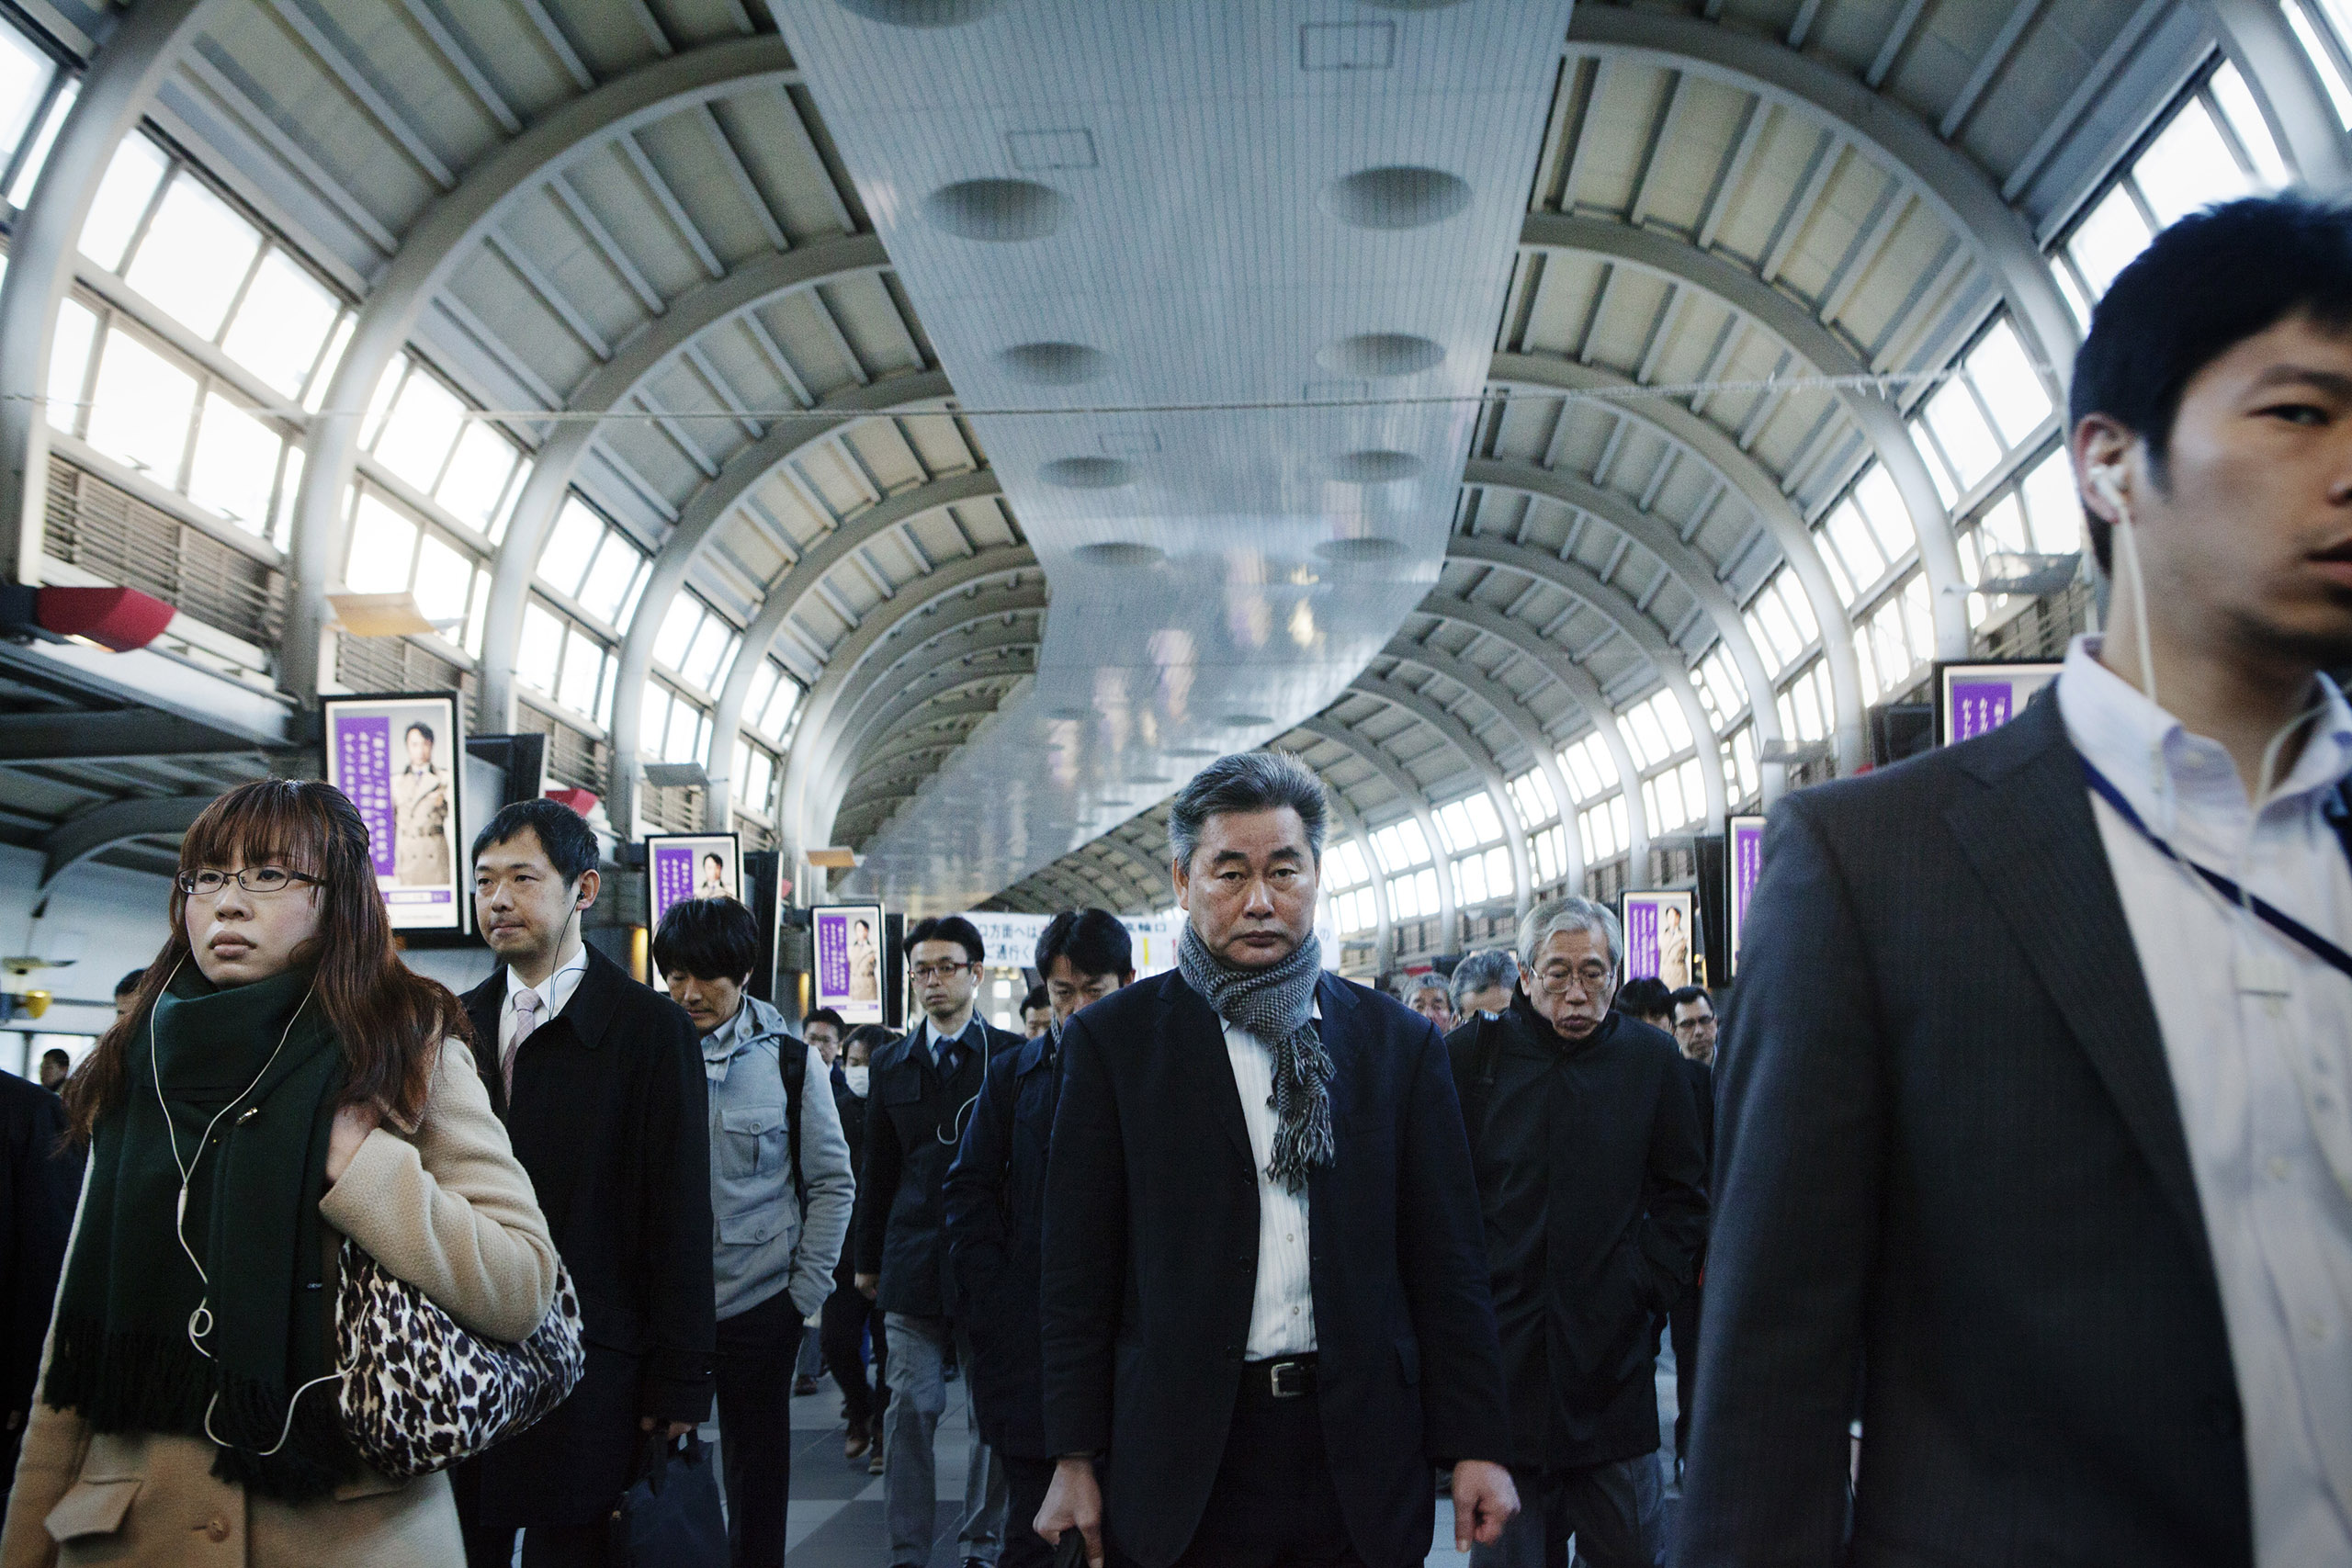 After rising hopes, Japan has slipped into another recession (Q. Sakamaki—Redux for TIME)